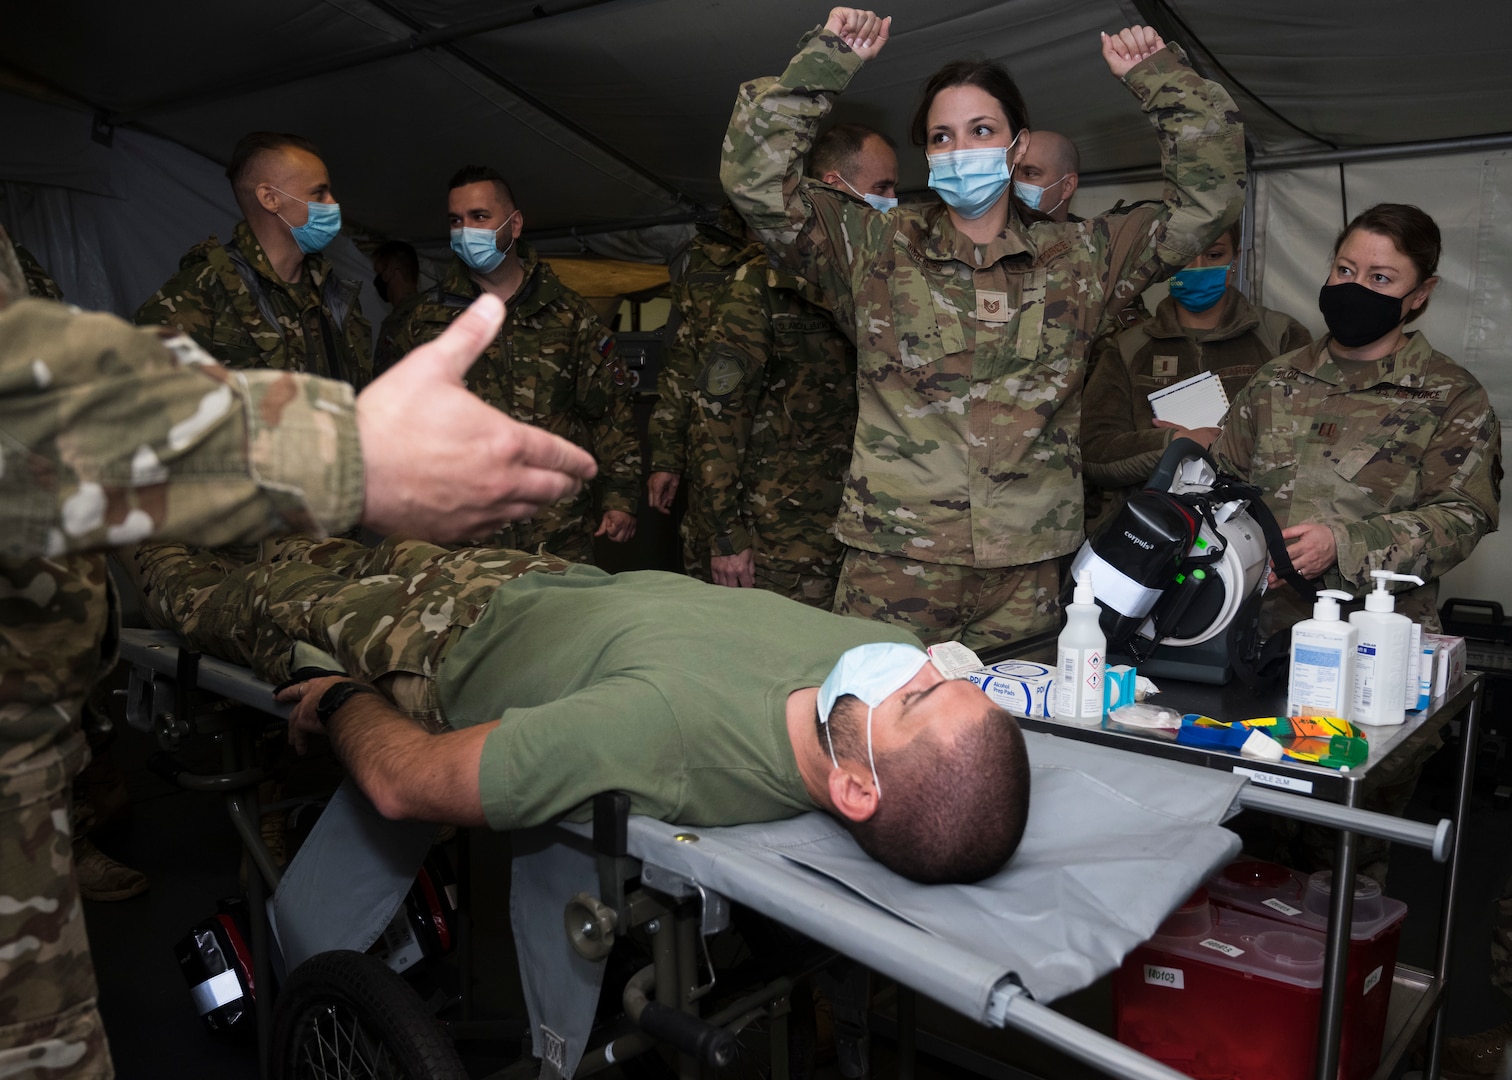 U.S. Air Force Tech. Sgt. Susanna Wohlford, Colorado Air National Guard, 140th Medical Group medic, trains with a defibrillator during exercise ADRIATIC STRIKE 21 in Ljubljana, Slovenia, May 17, 2021. The exercise is part of DEFENDER-EUROPE 21, testing the command’s ability to integrate 30,000 U.S., allied, and partner forces from 26 nations to conduct operations in more than a dozen nations from the Baltics to Africa, to the Black Sea and Balkan regions.